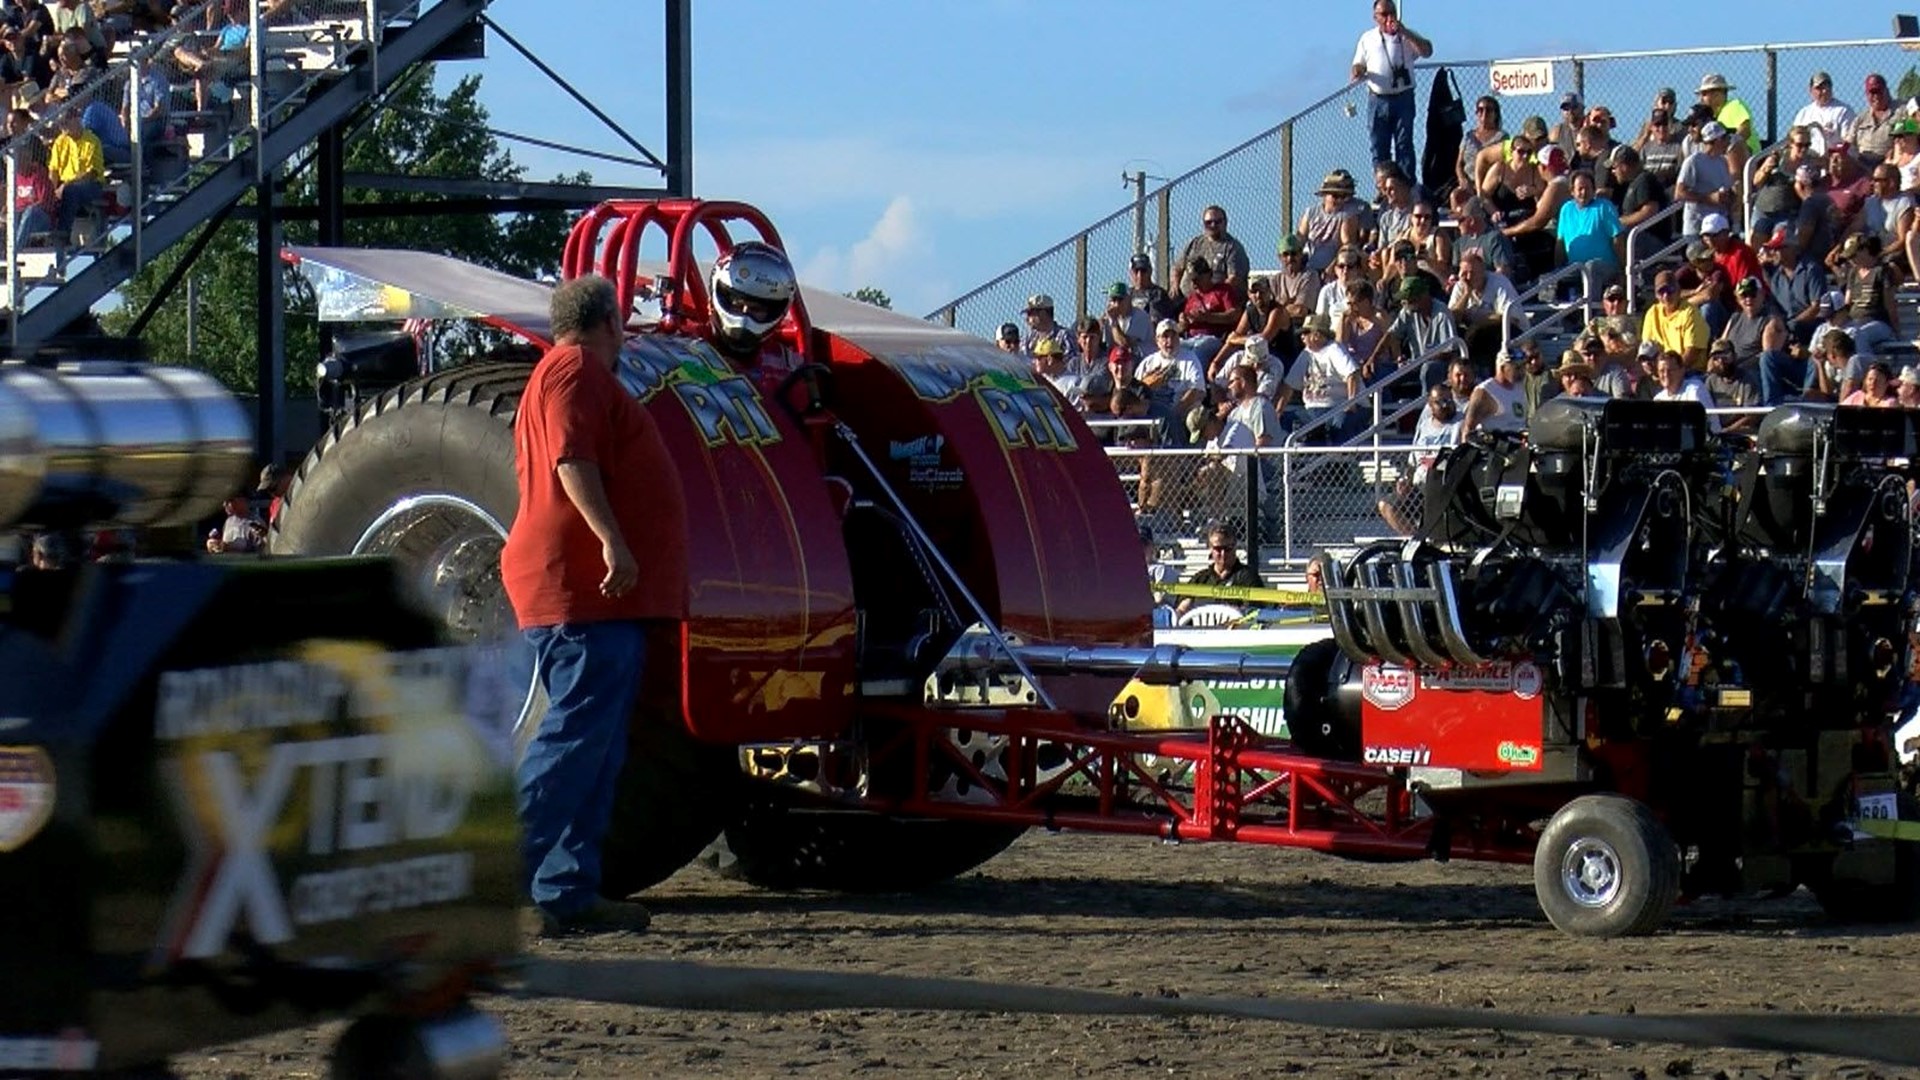 National Tractor Pull Championships return to Bowling Green